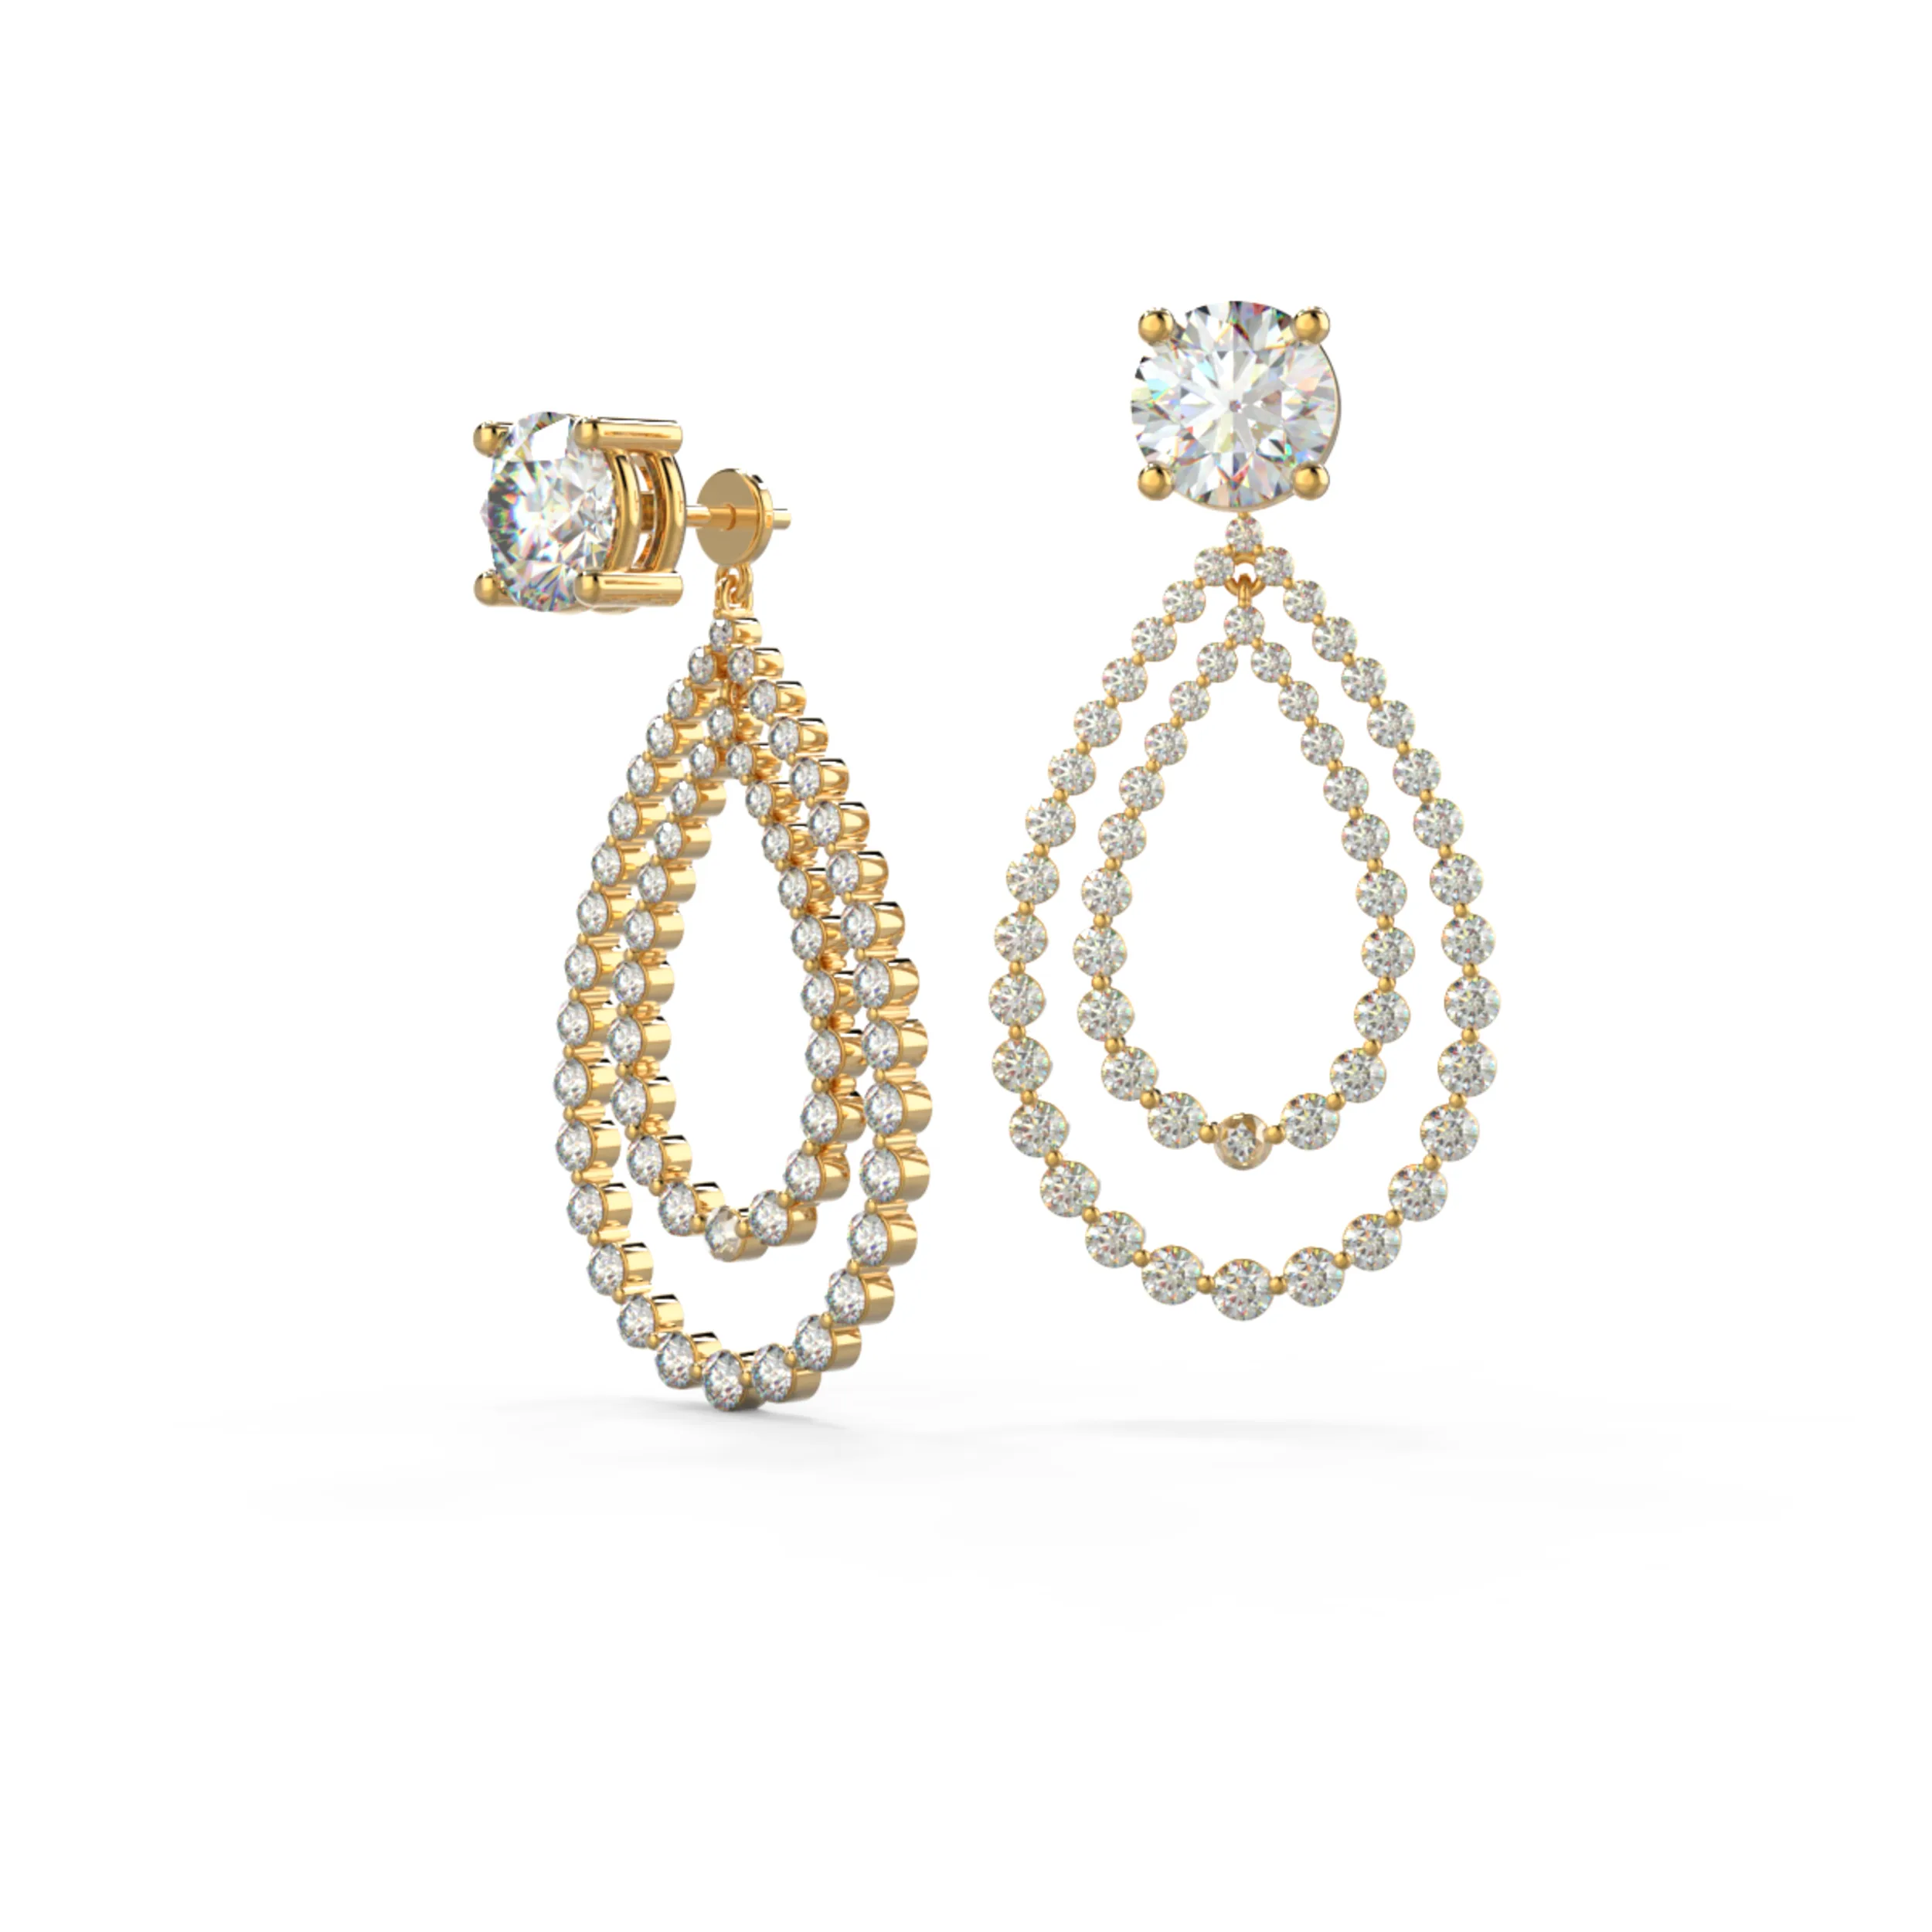 Round Diamonds set in Yellow Gold Double Open Pear Shaped Diamond Earring Jackets ()